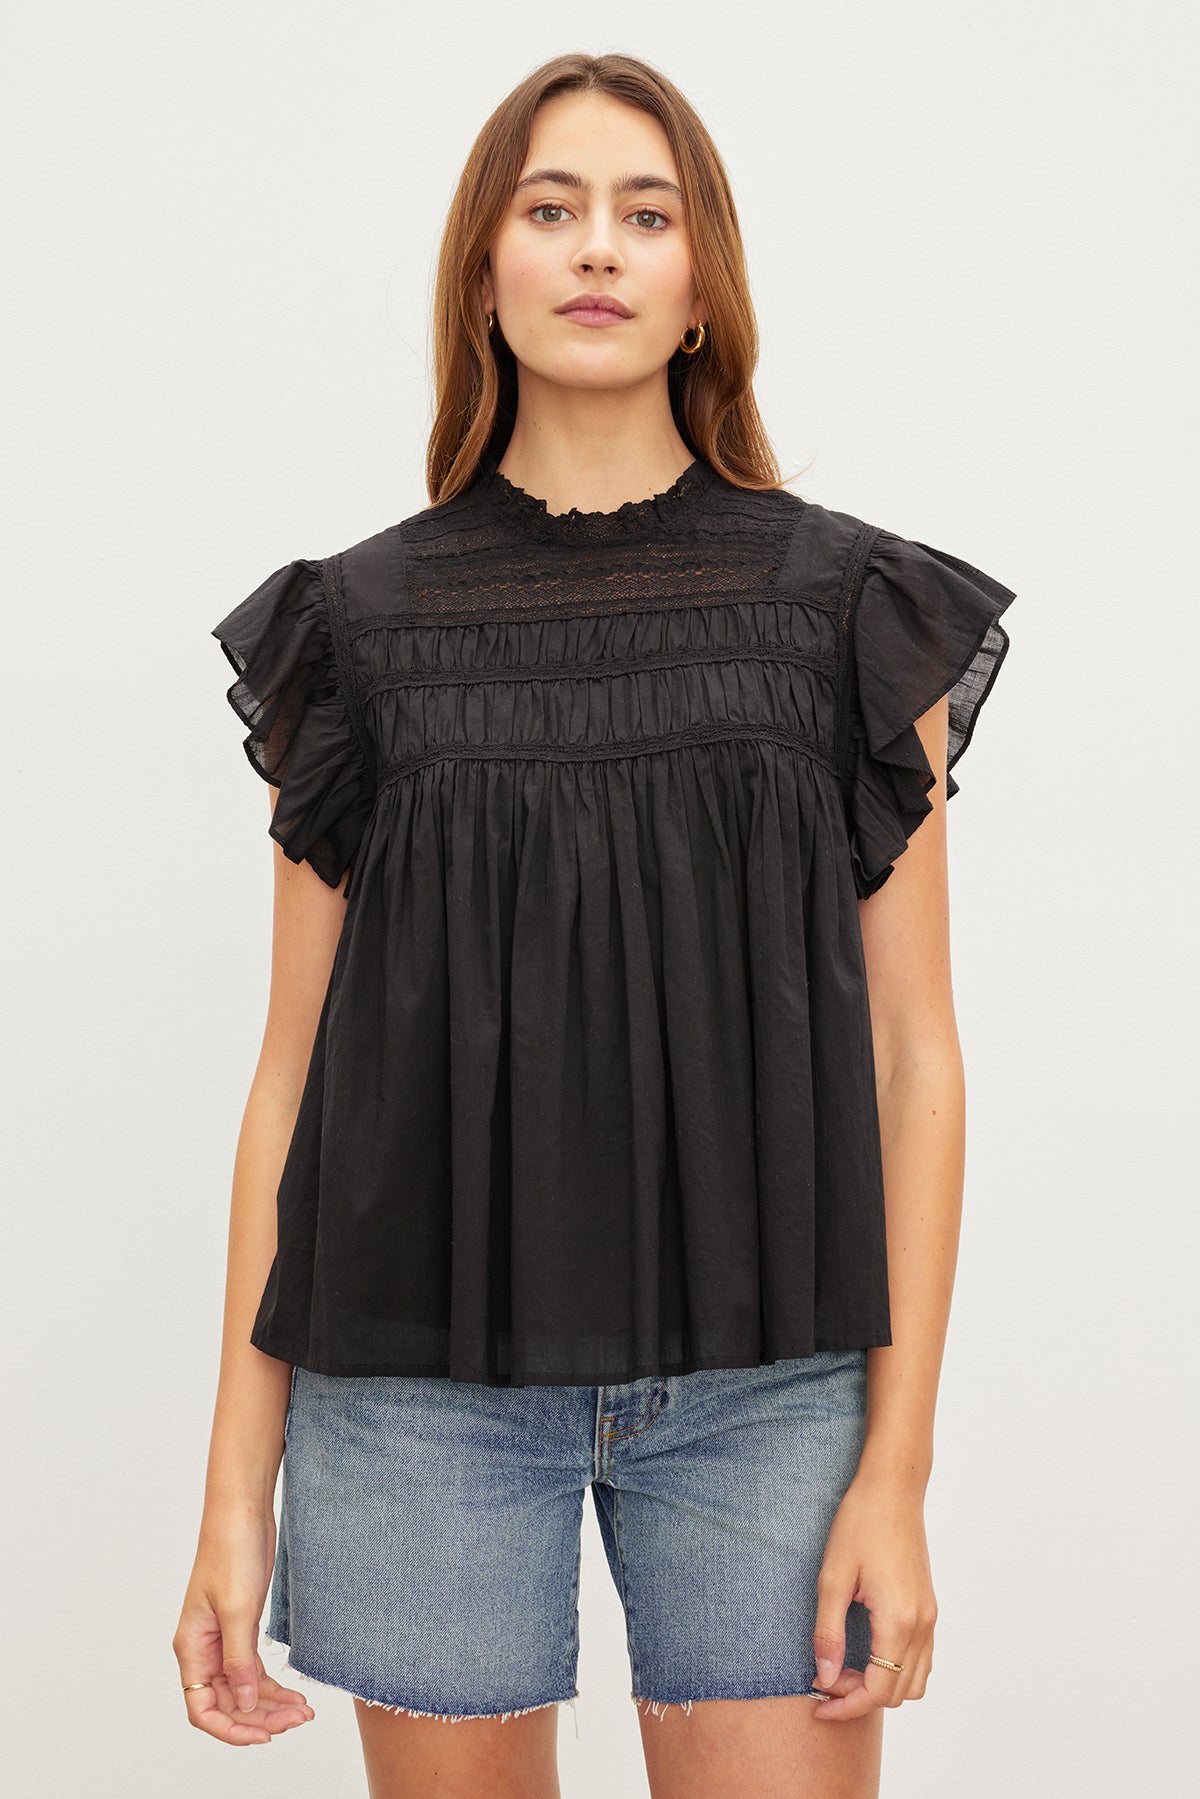 A woman wearing the INESSA COTTON LACE TOP by Velvet by Graham & Spencer, a black top with ruffled sleeves.-35967734218945